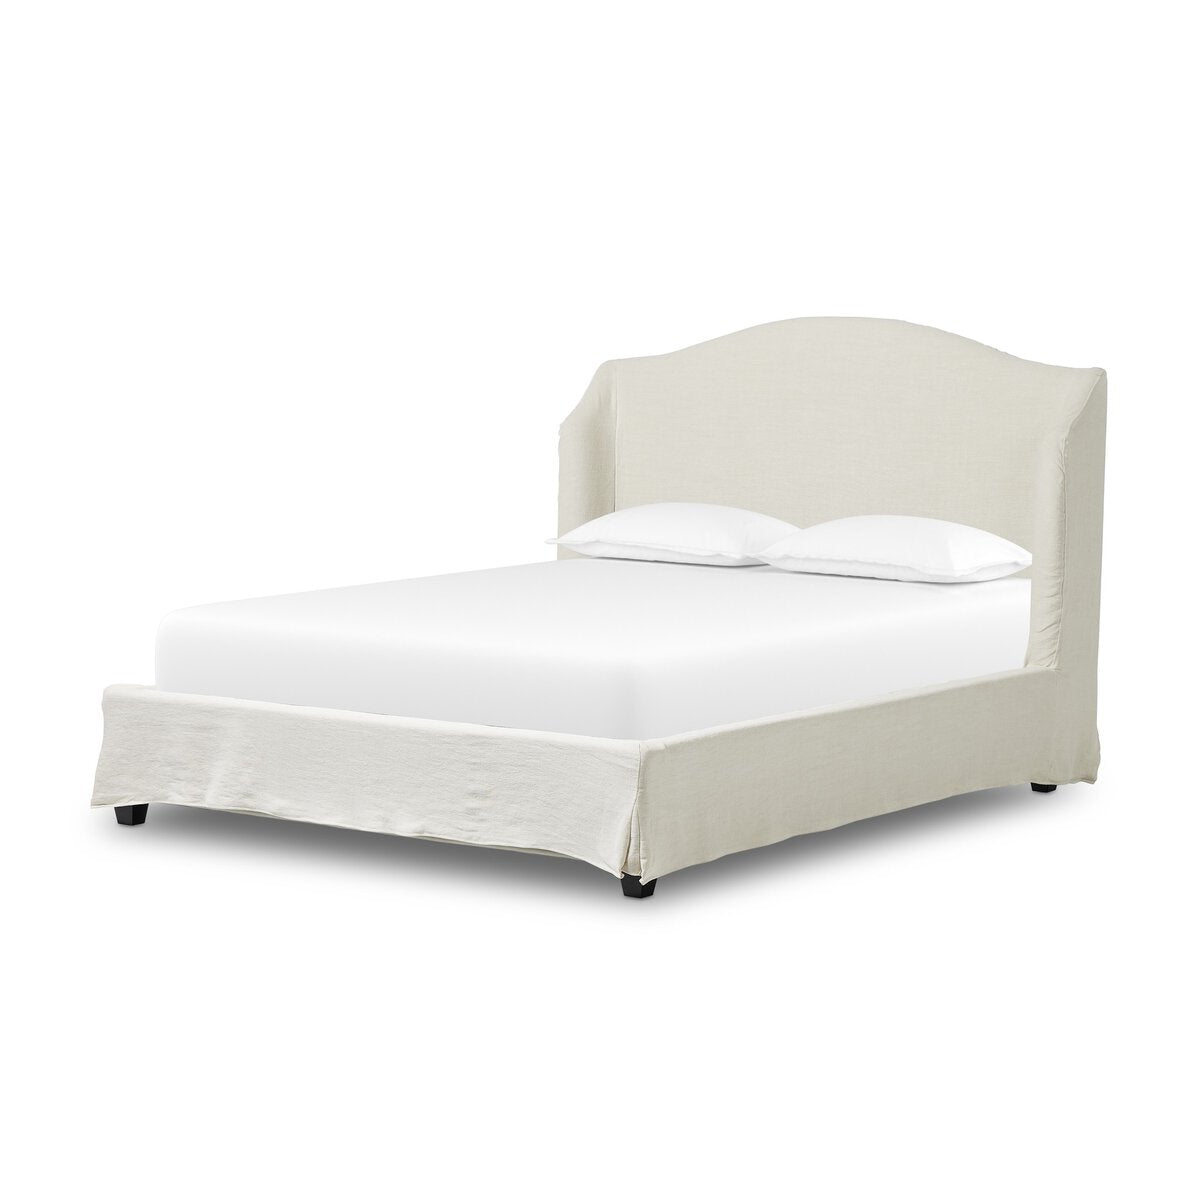 Mariole Slipcover Bed